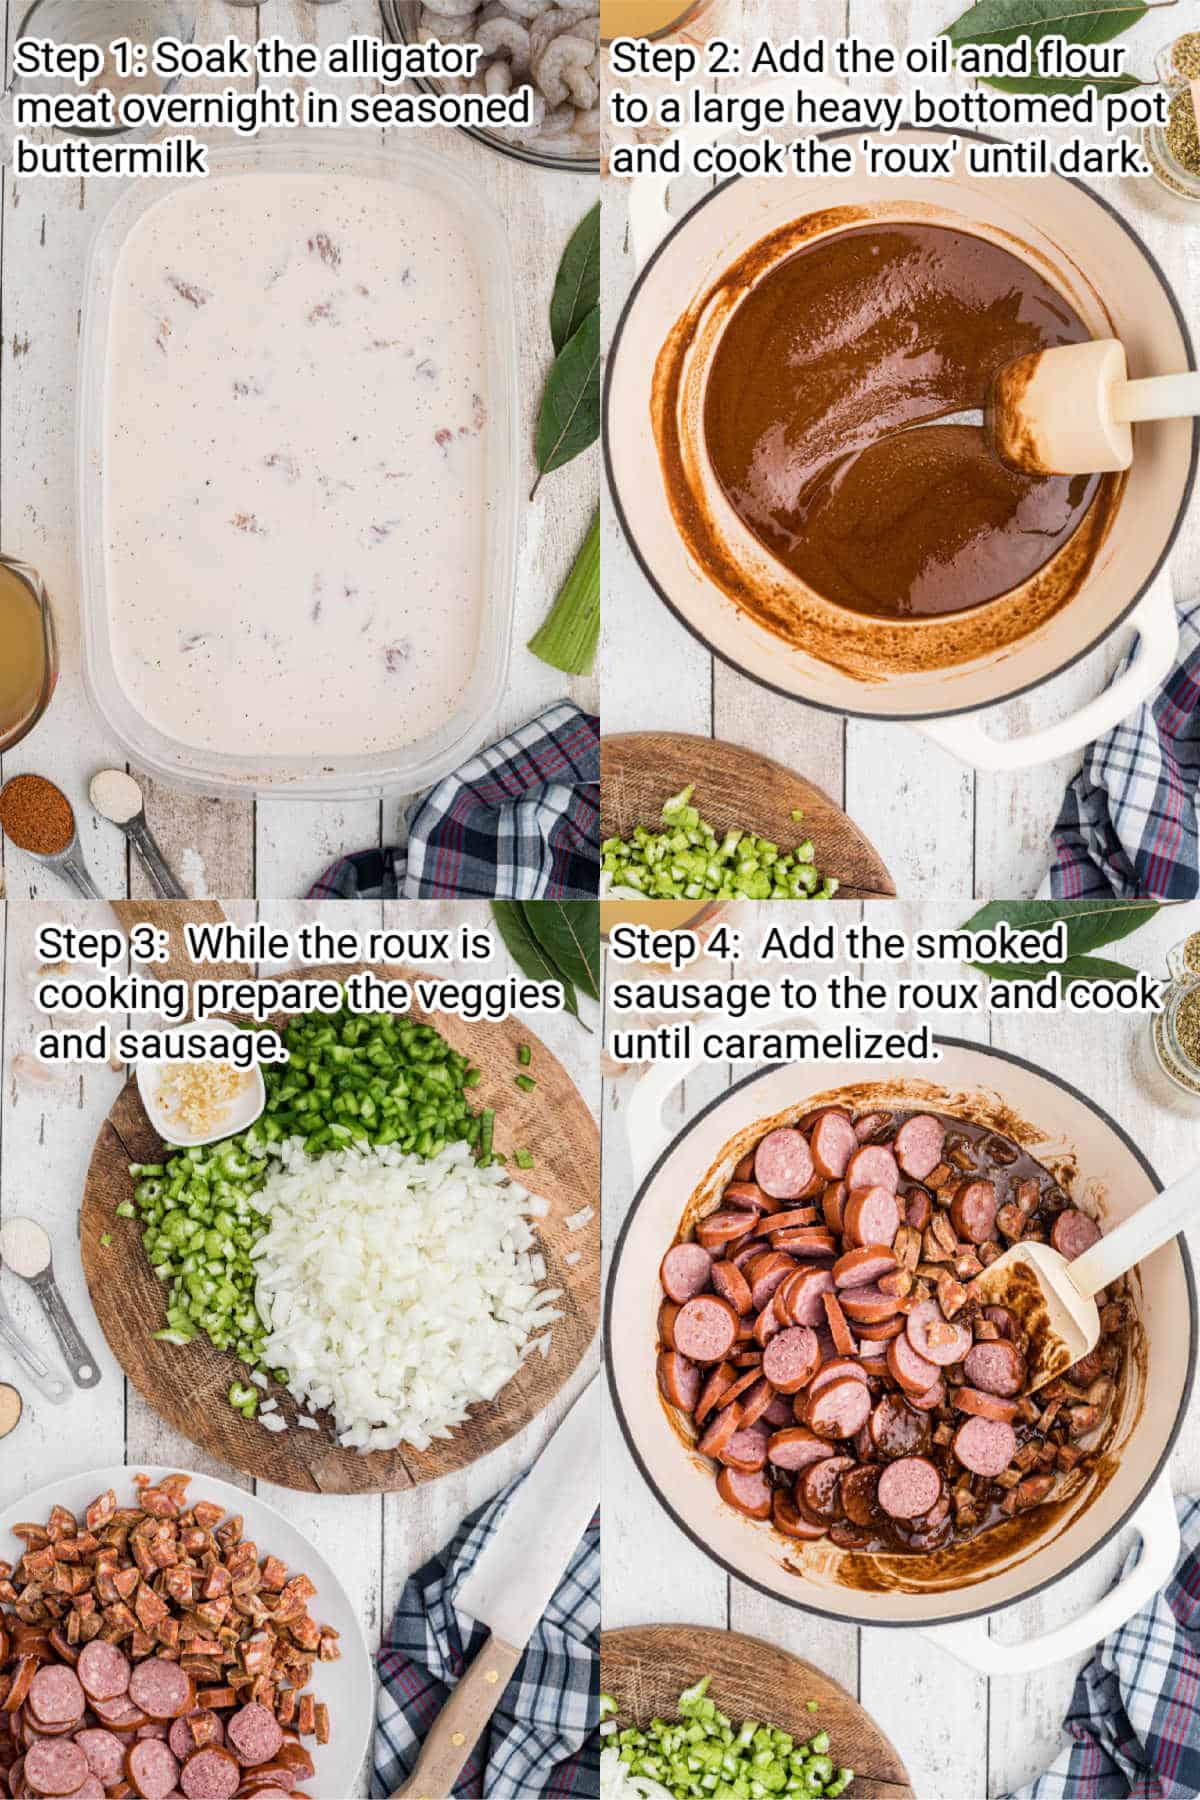 four images of recipes steps for making an alligator gumbo